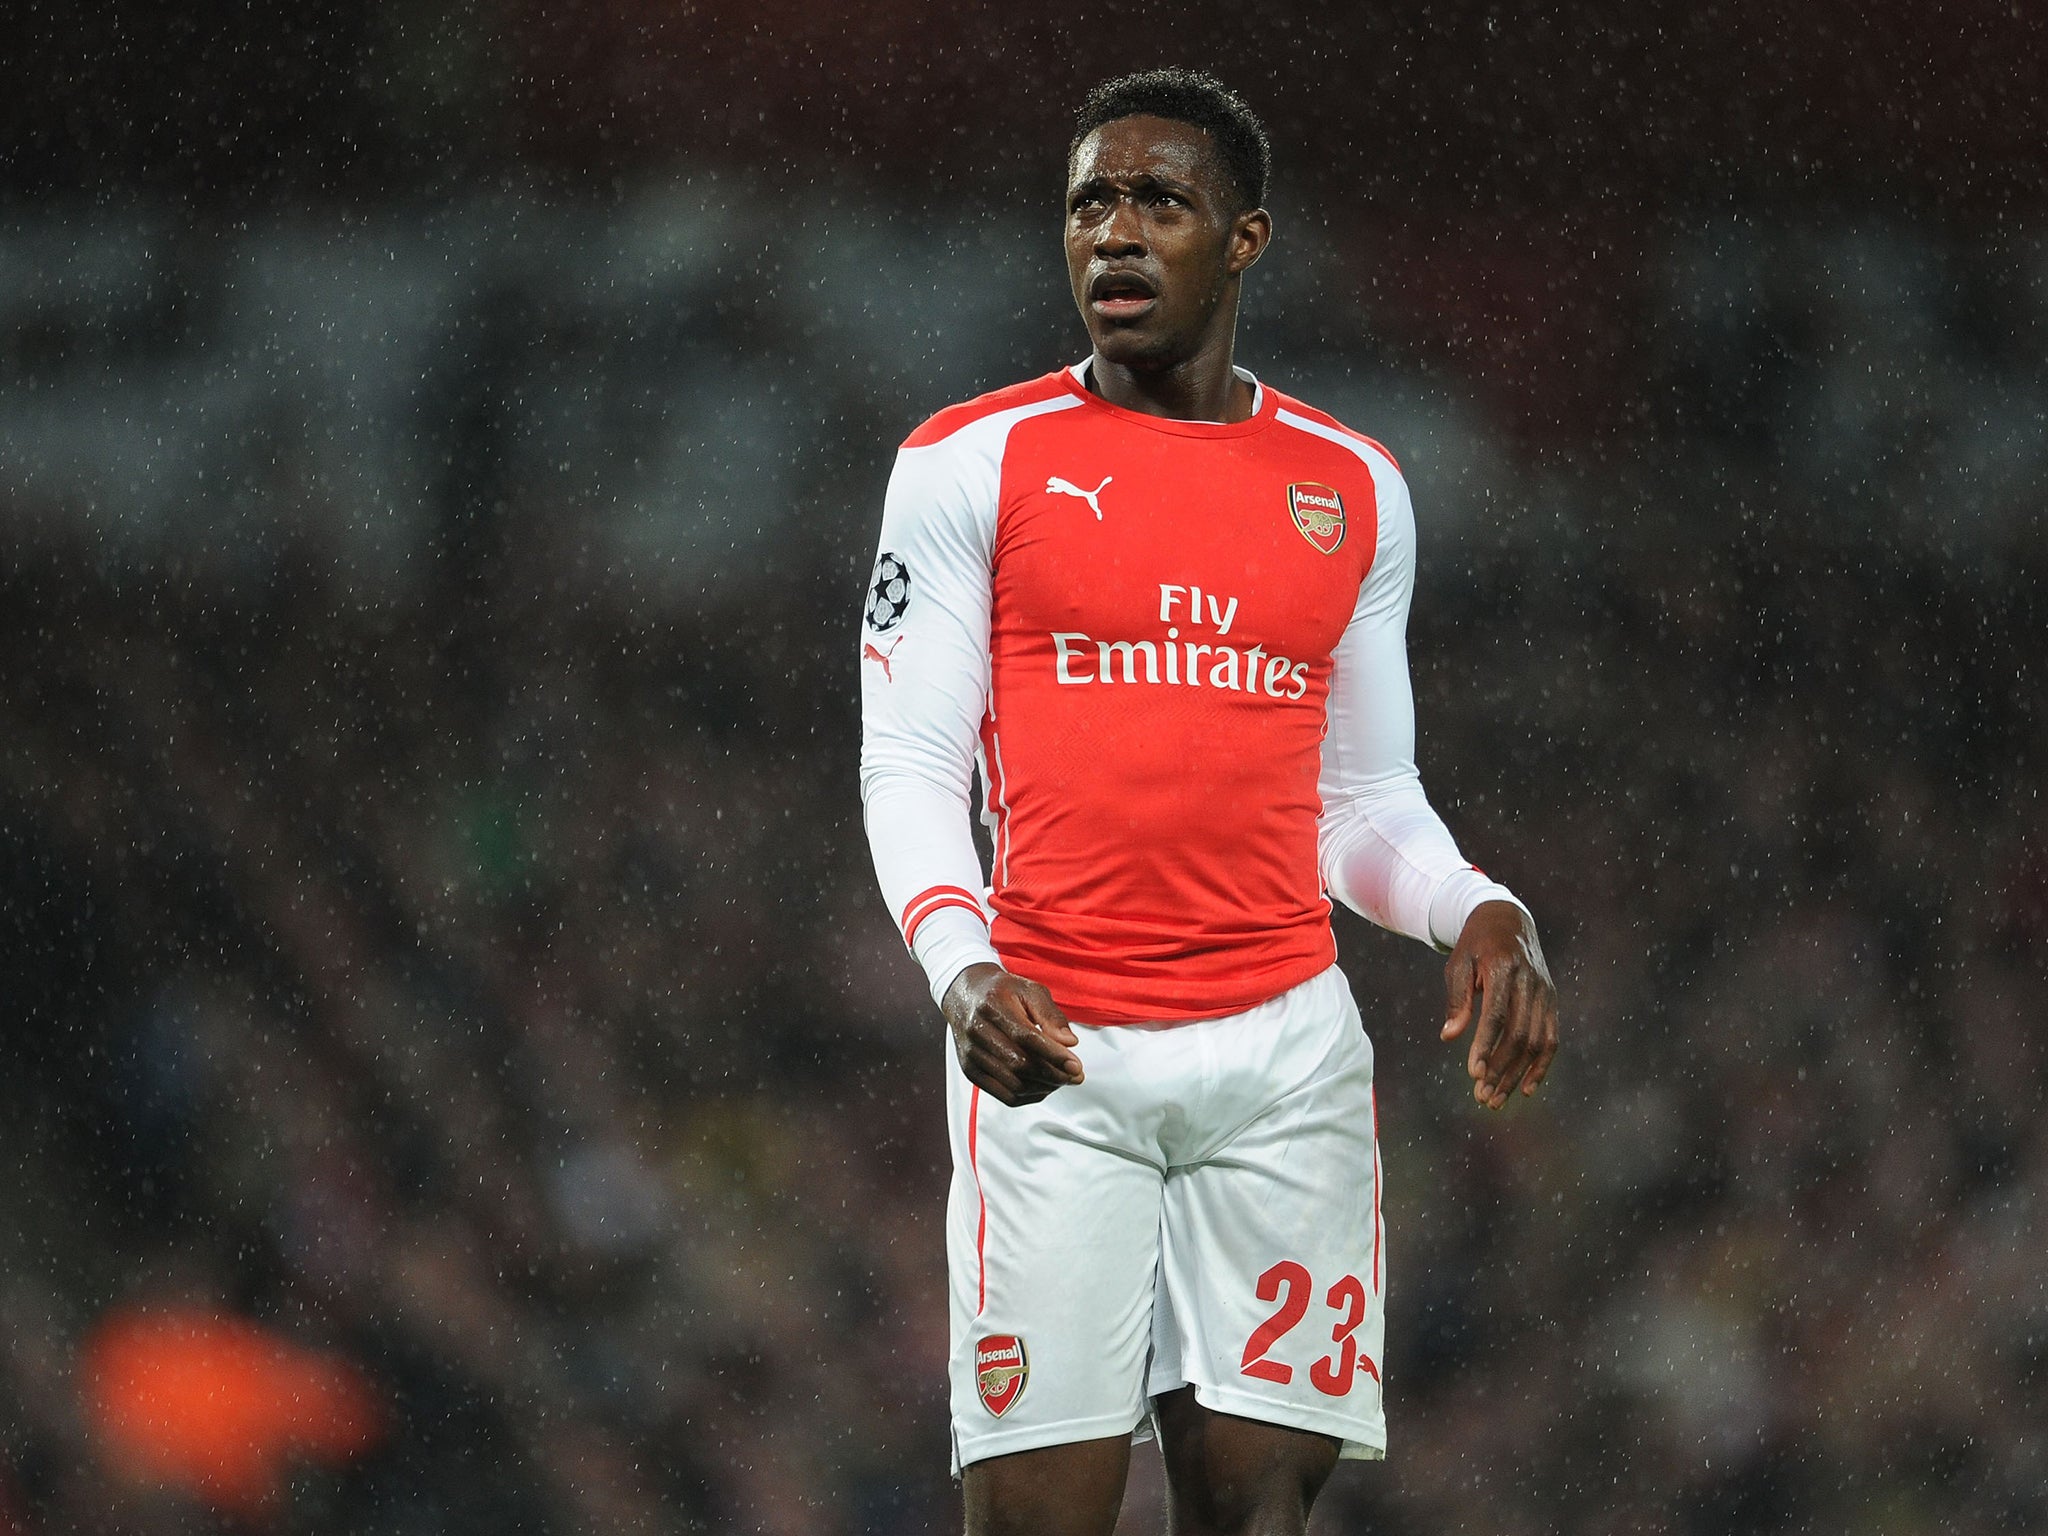 Danny Welbeck swapped Manchester United for Arsenal on
transfer deadline day and is set to face his old club at the Emirates on Saturday